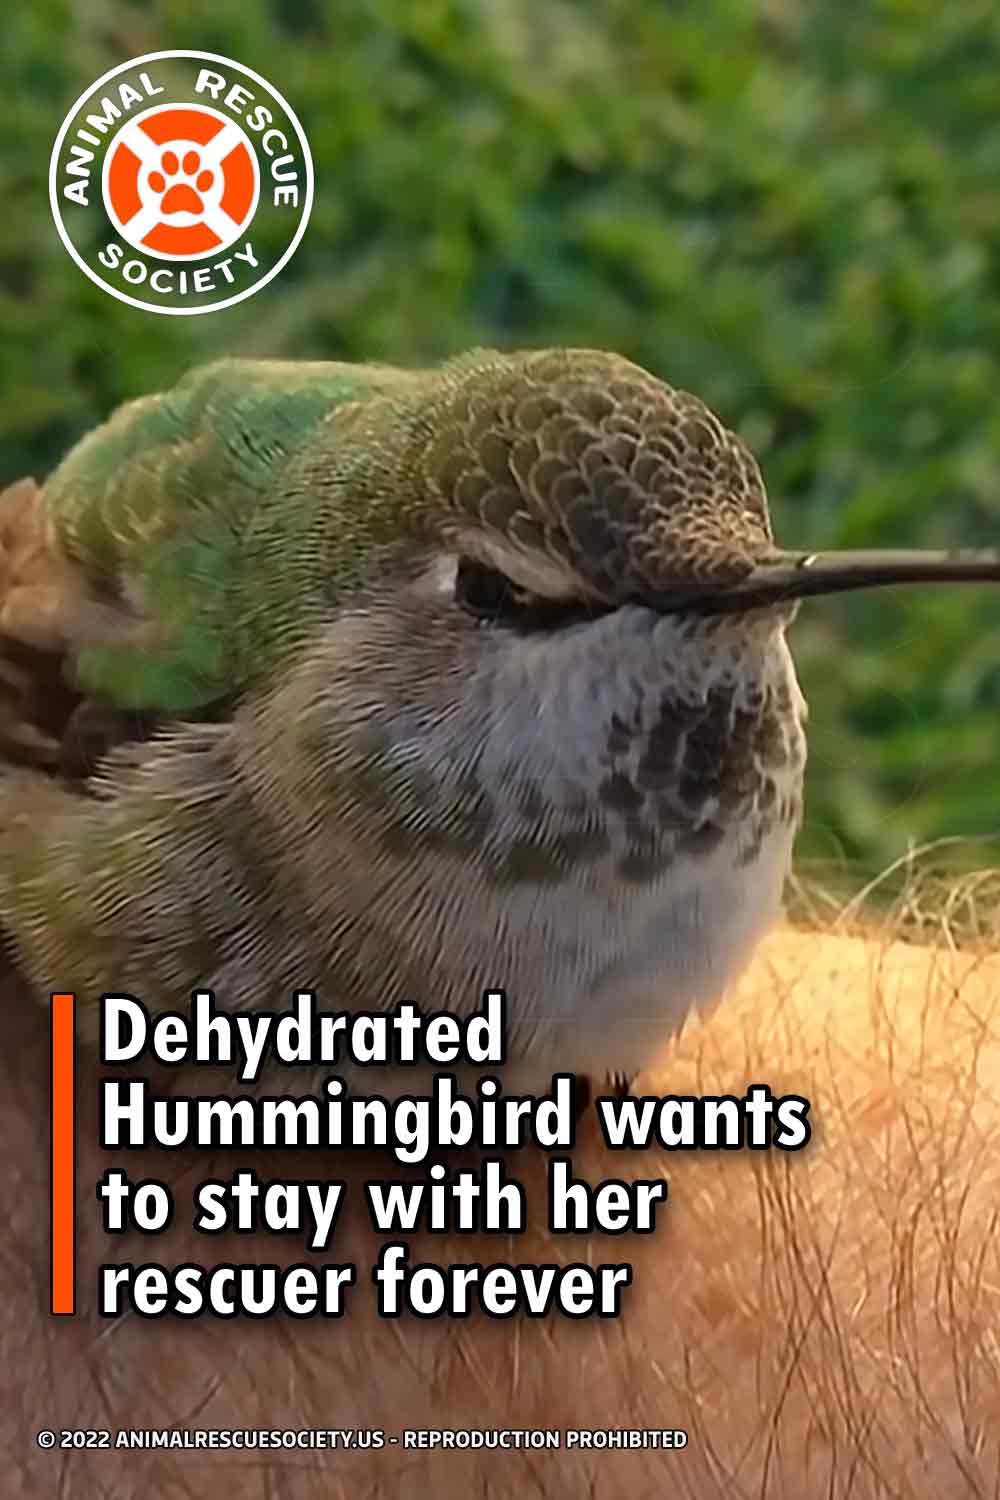 Dehydrated Hummingbird wants to stay with her rescuer forever